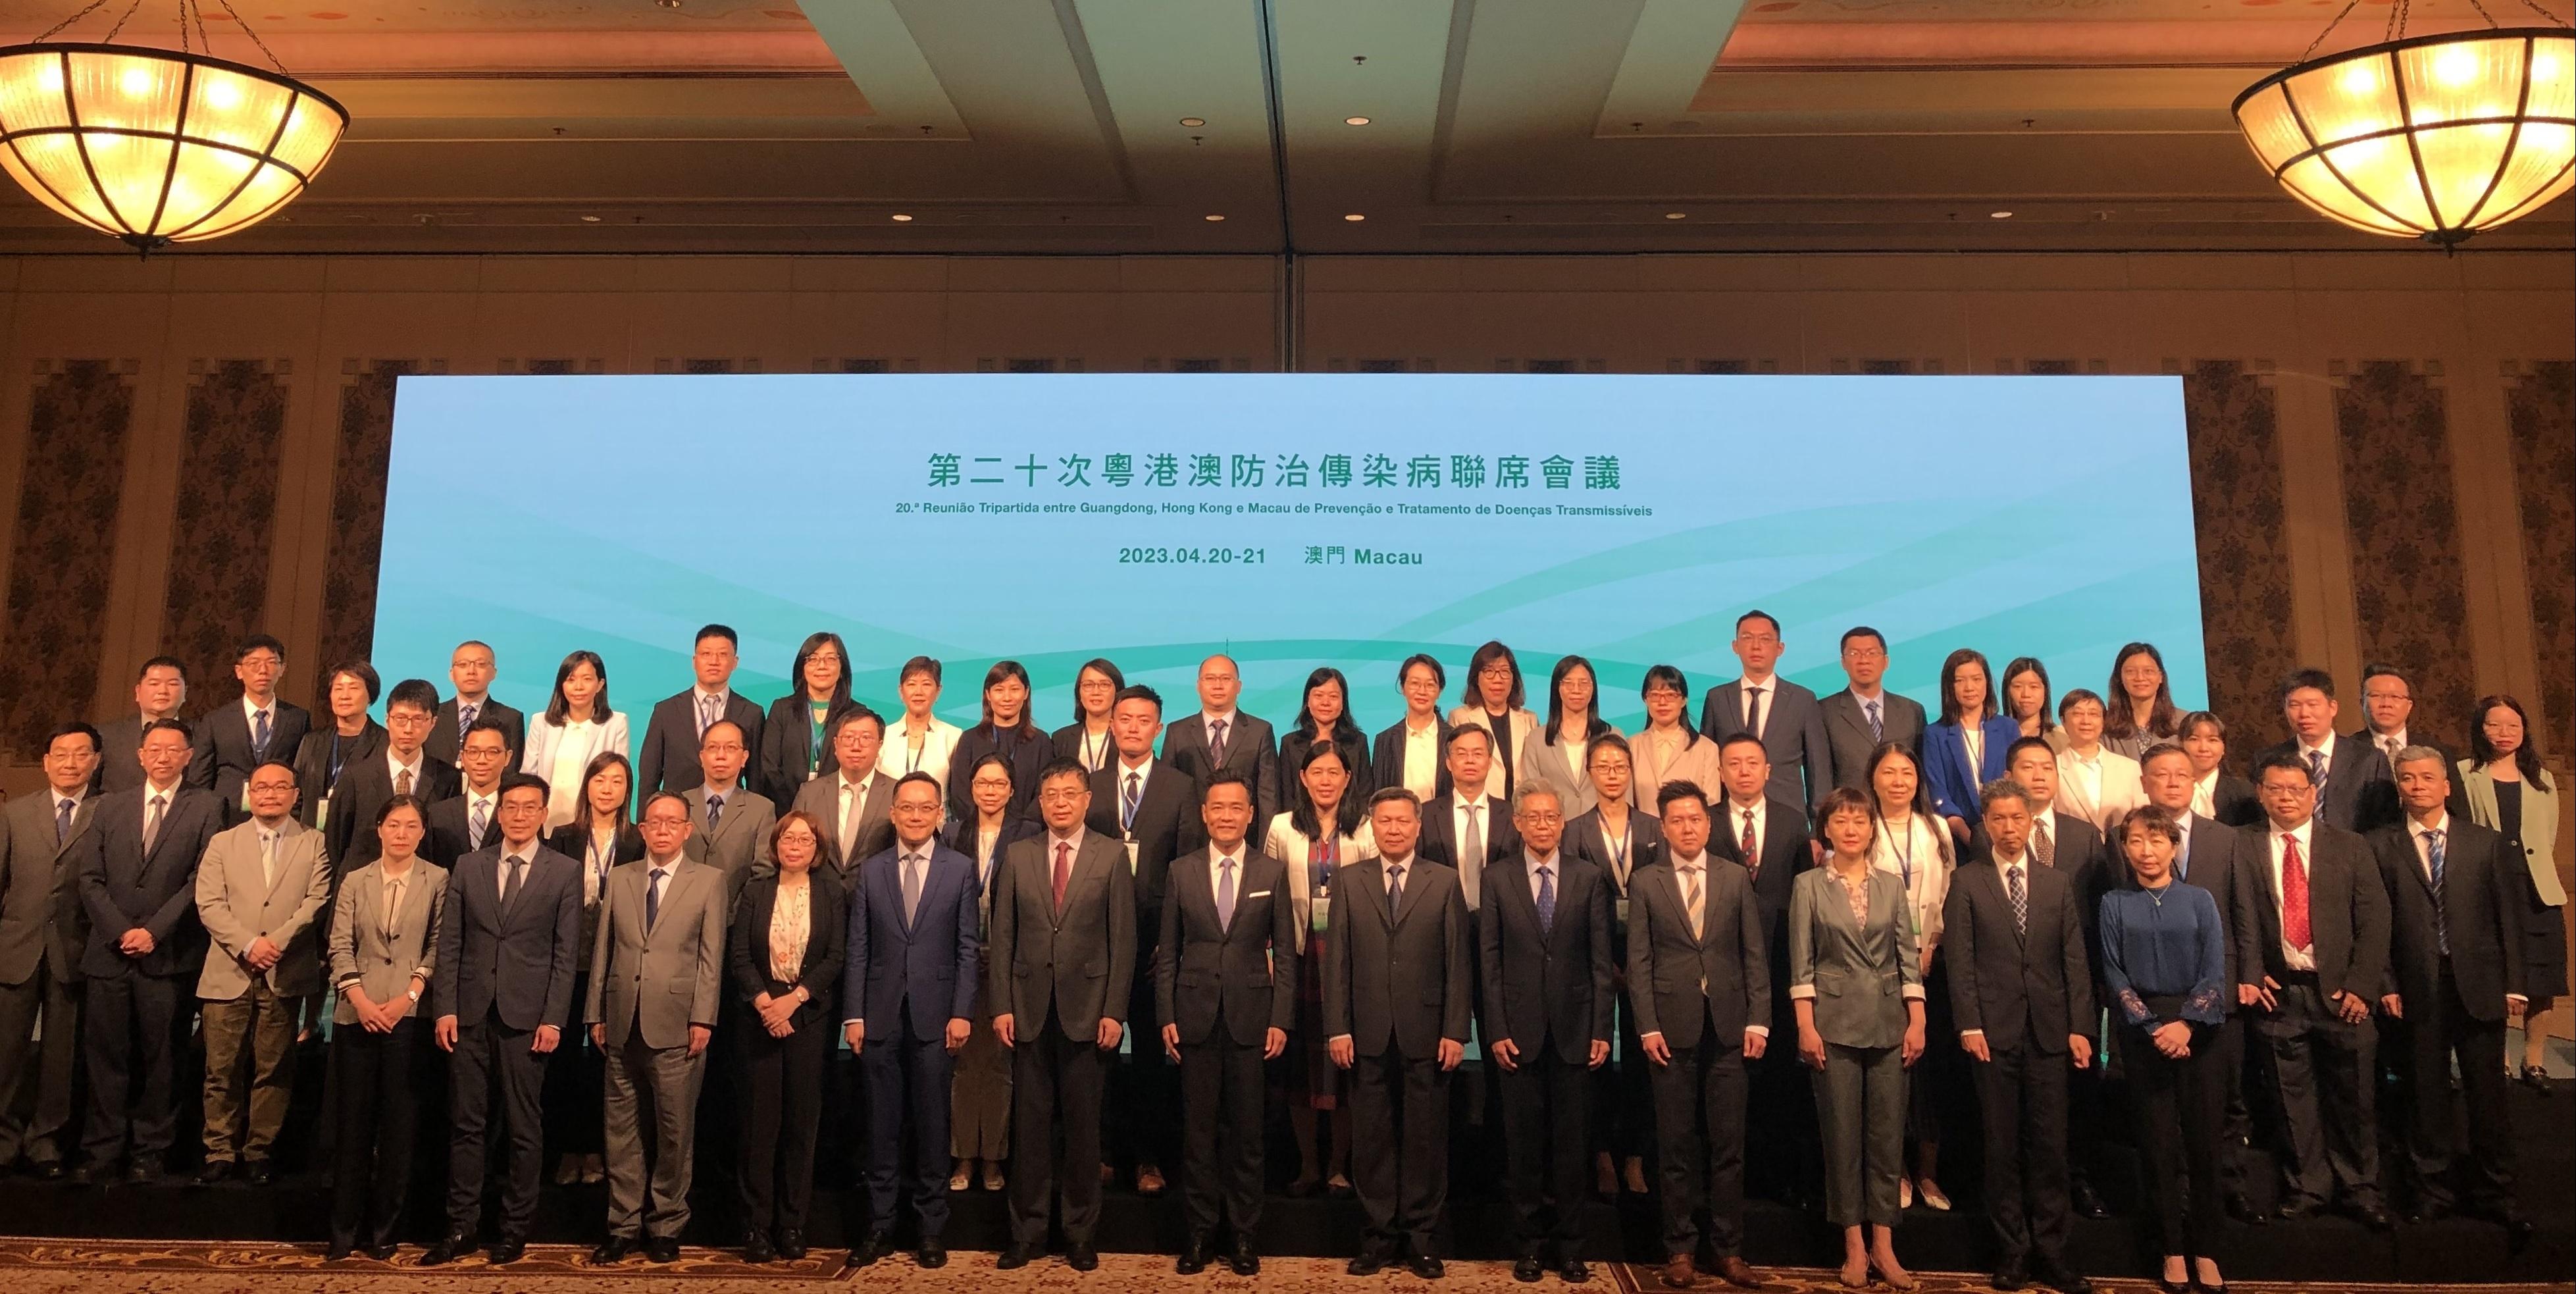 The two-day 20th Tripartite Meeting on Prevention and Control of Communicable Diseases successfully concluded in Macao today (April 21). The Director-General of the Department of Publicity and Culture of the Liaison Office of the Central People's Government in the Macao Special Administrative Region, Mr Wan Sucheng (front row, sixth left); the Director of the Health Bureau of Macao, Dr Lo Iek-long (front row, centre); Deputy Director General of the Health Commission of Guangdong Province Mr Huang Fei (front row, sixth right); the Director of Health, Dr Ronald Lam (front row, fifth left); the Controller of the Centre for Health Protection of the Department of Health, Dr Edwin Tsui (front row, fourth right); and representatives from the three places are gathered at the opening session of the meeting.